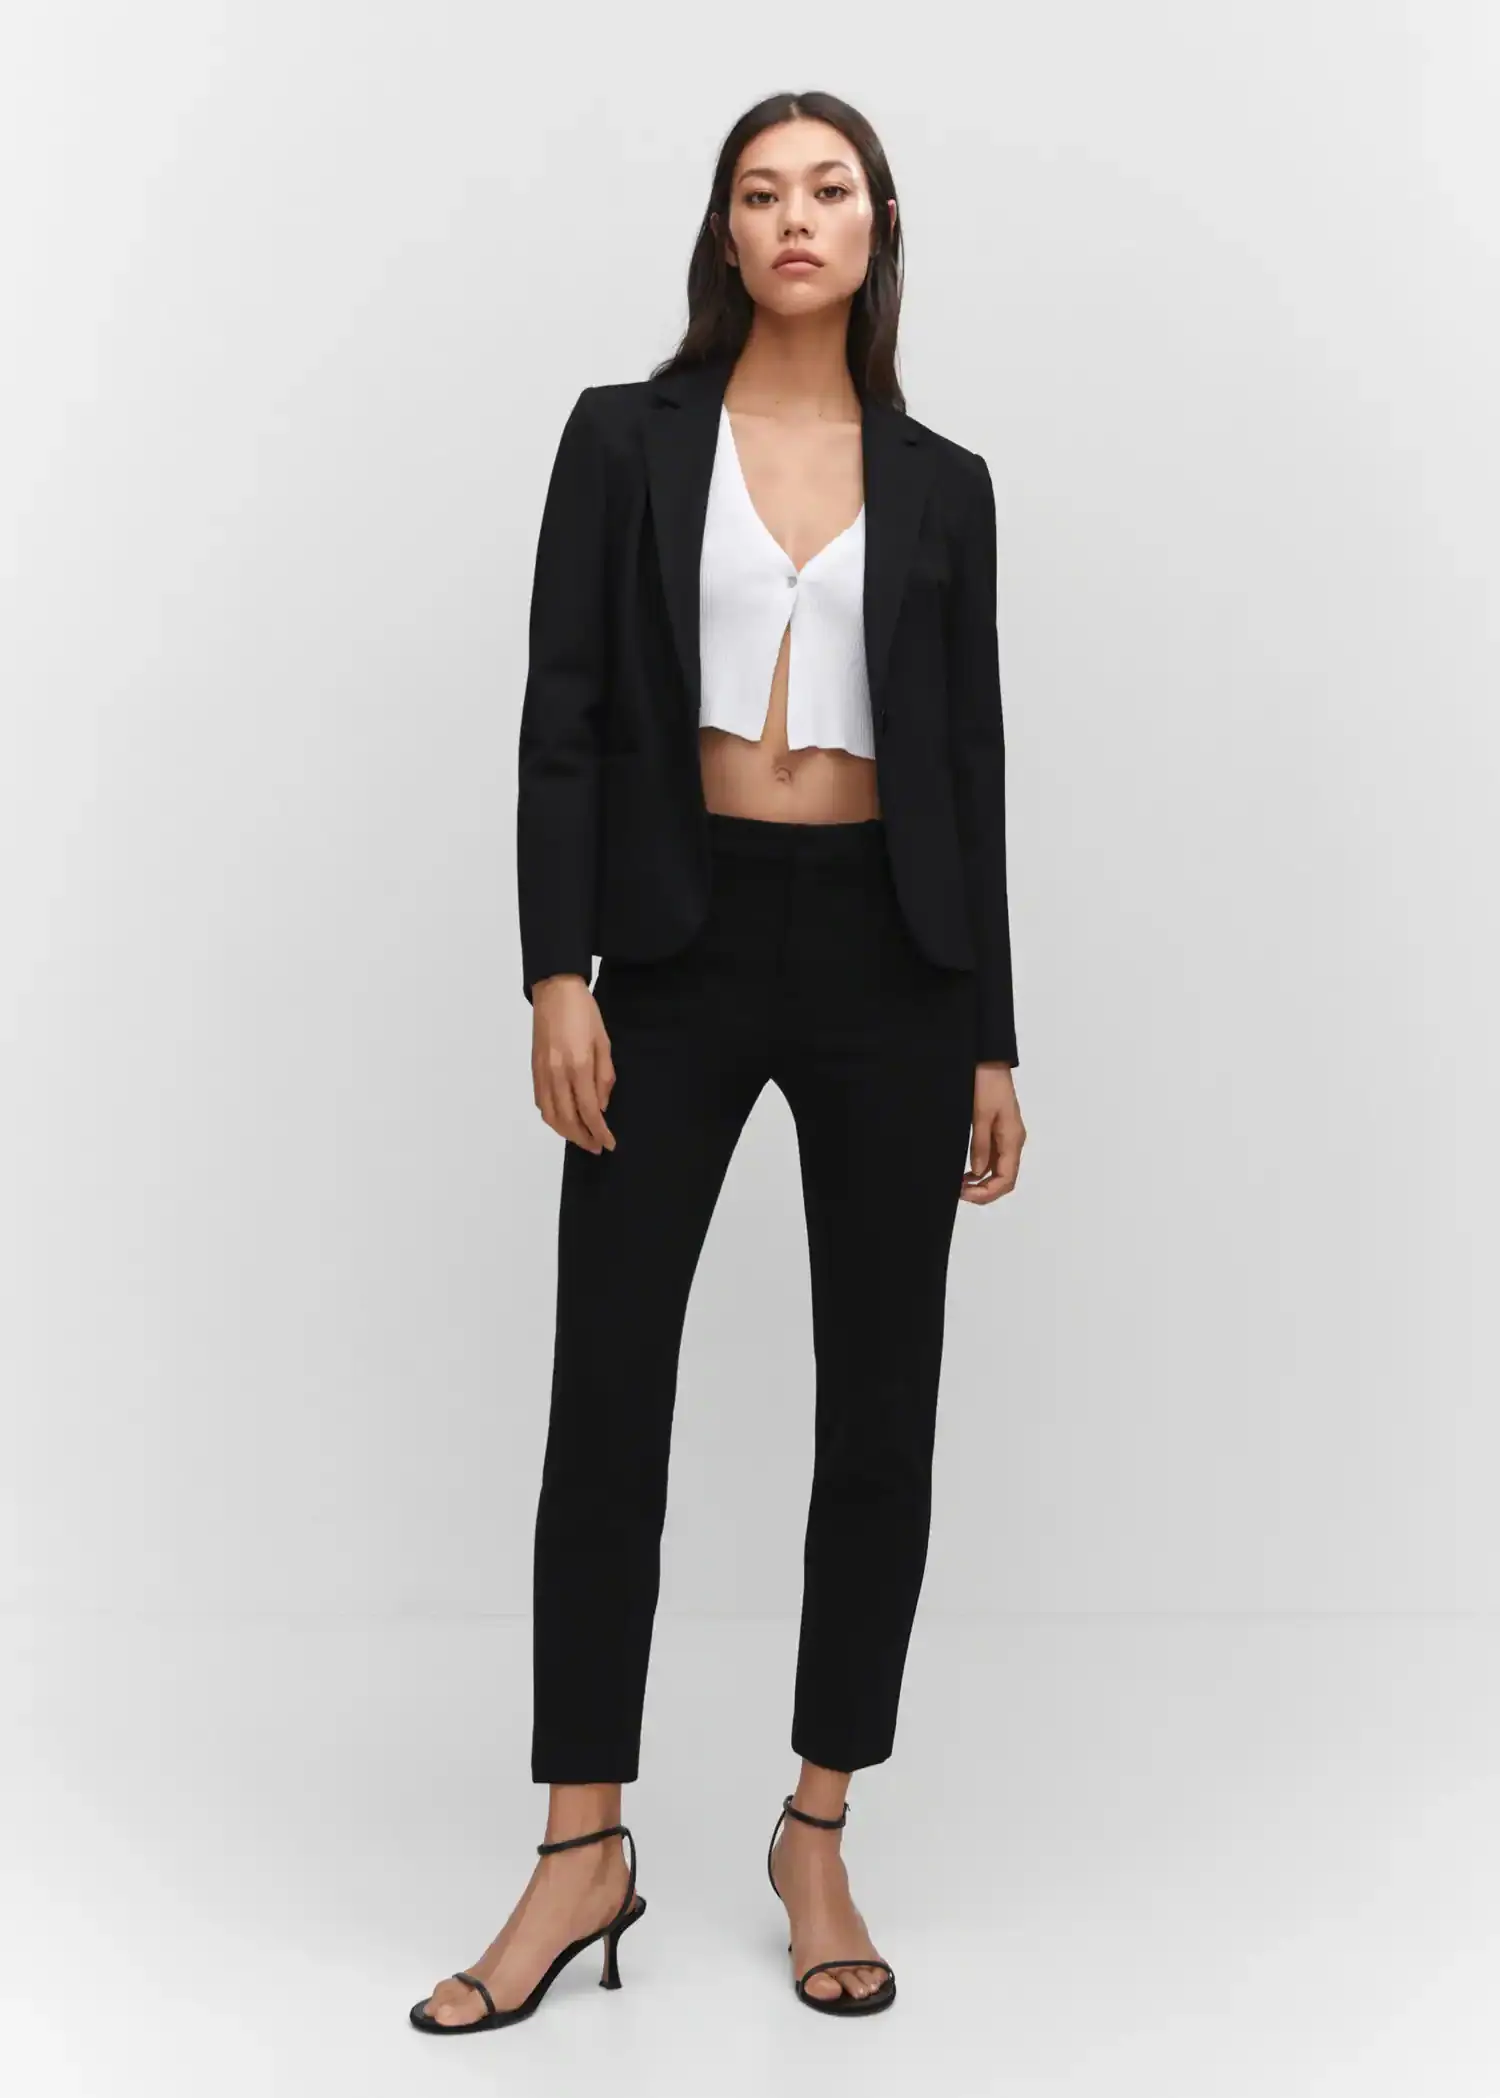 Mango Rome-knit straight trousers. a woman wearing a black suit and a white top. 